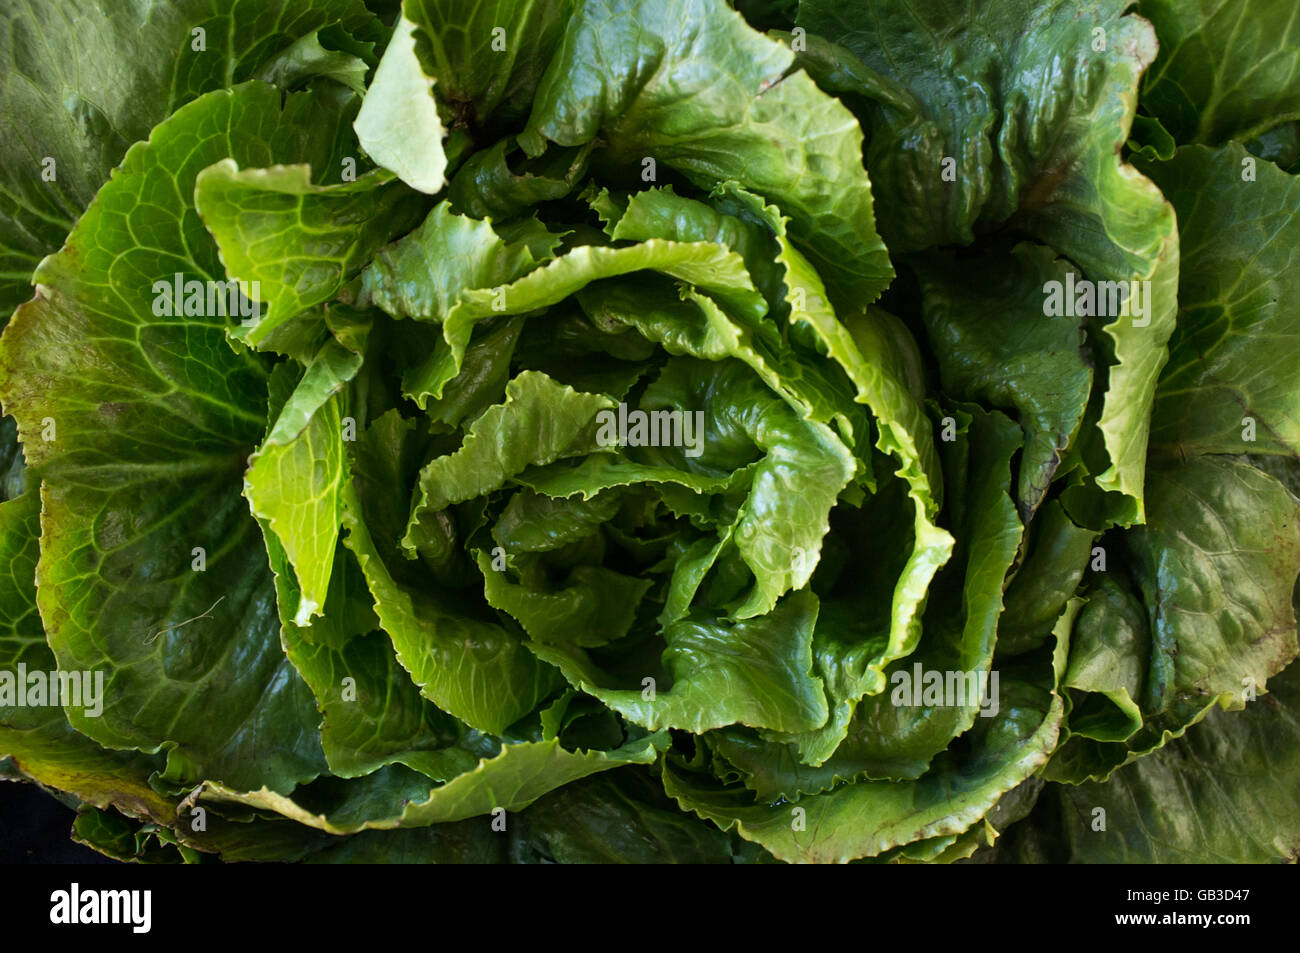 https://c8.alamy.com/comp/GB3D47/bunch-of-collard-green-leaves-in-farmers-market-close-up-image-GB3D47.jpg